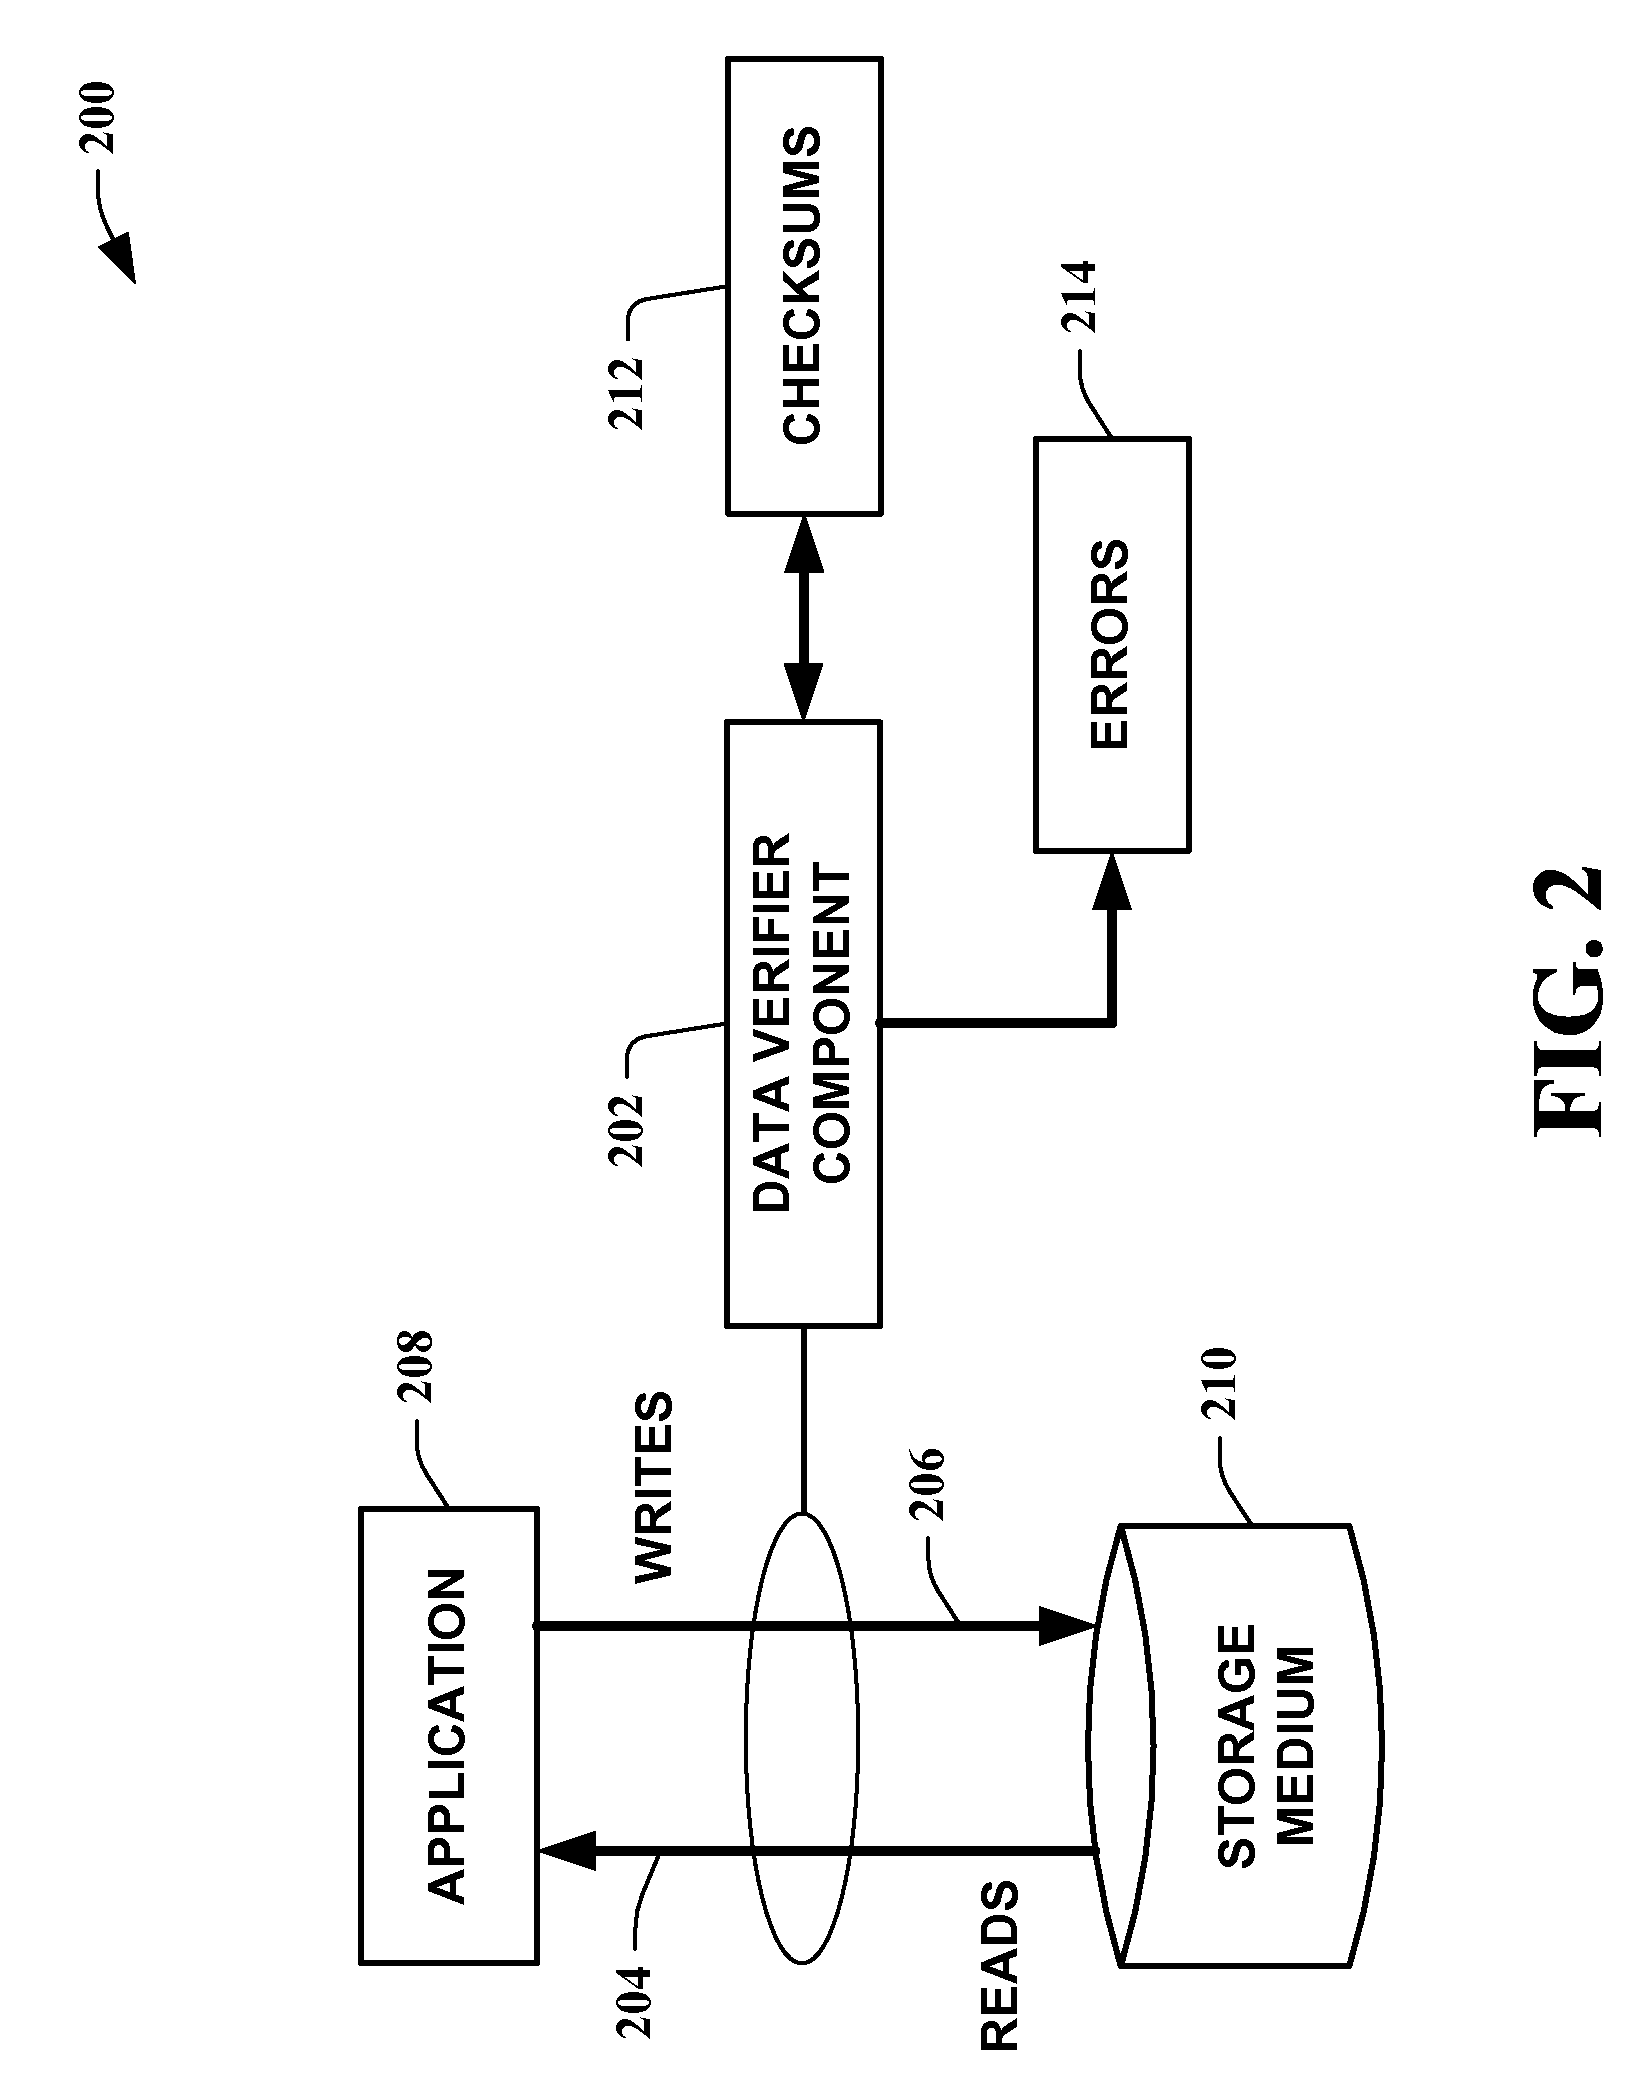 Systems and methods for enhanced stored data verification utilizing pageable pool memory